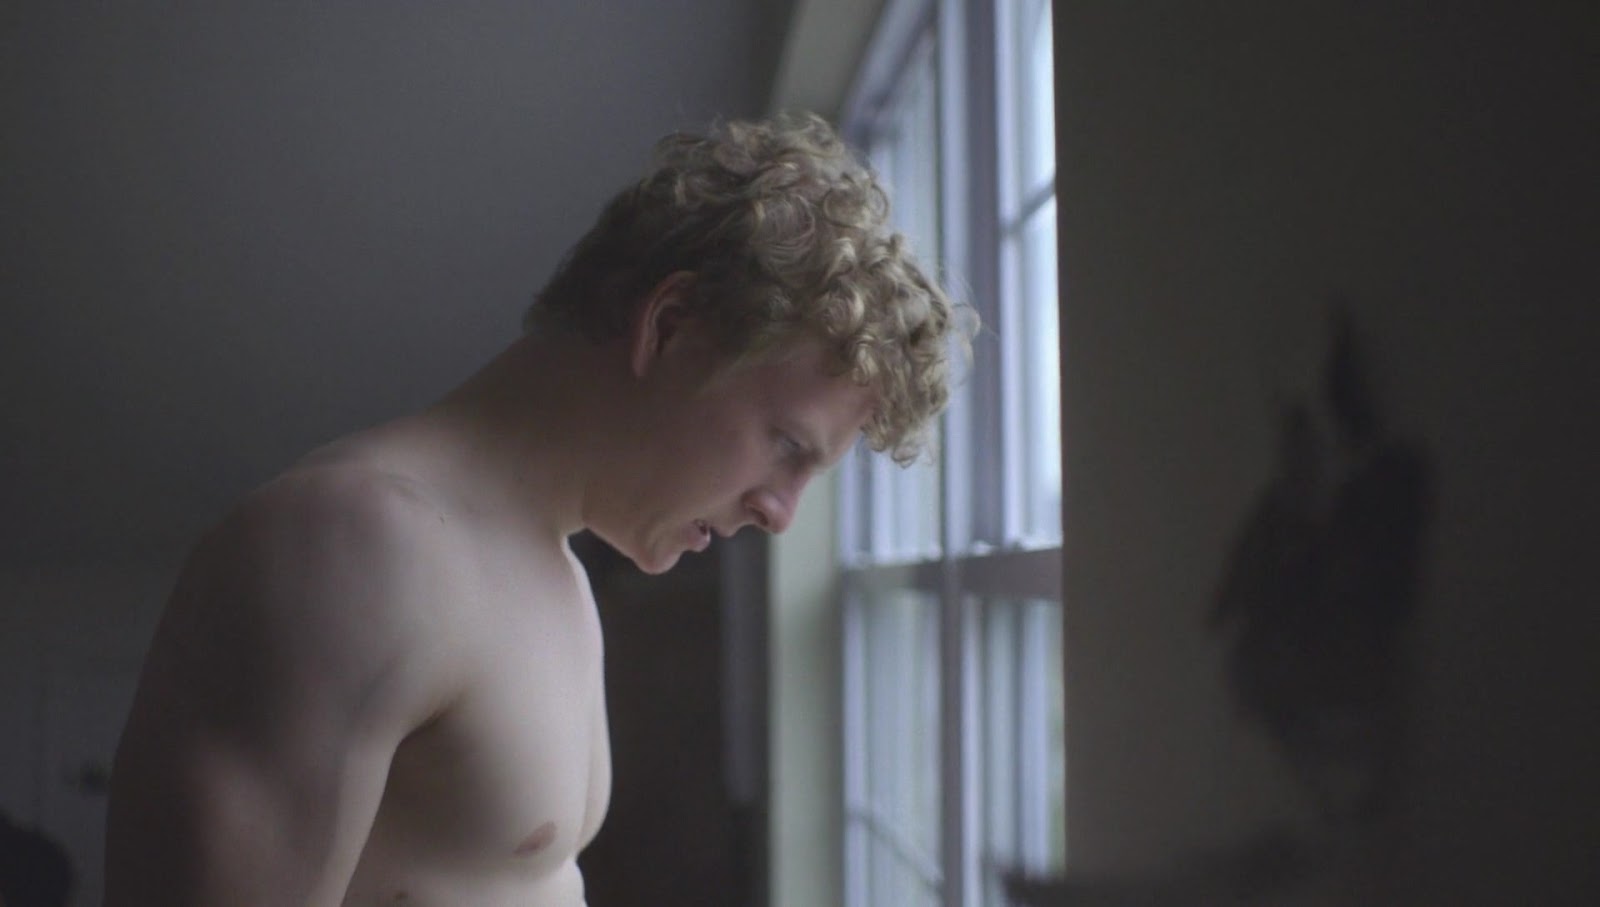 Patrick Gibson nude in The OA 1-01 "Homecoming" .